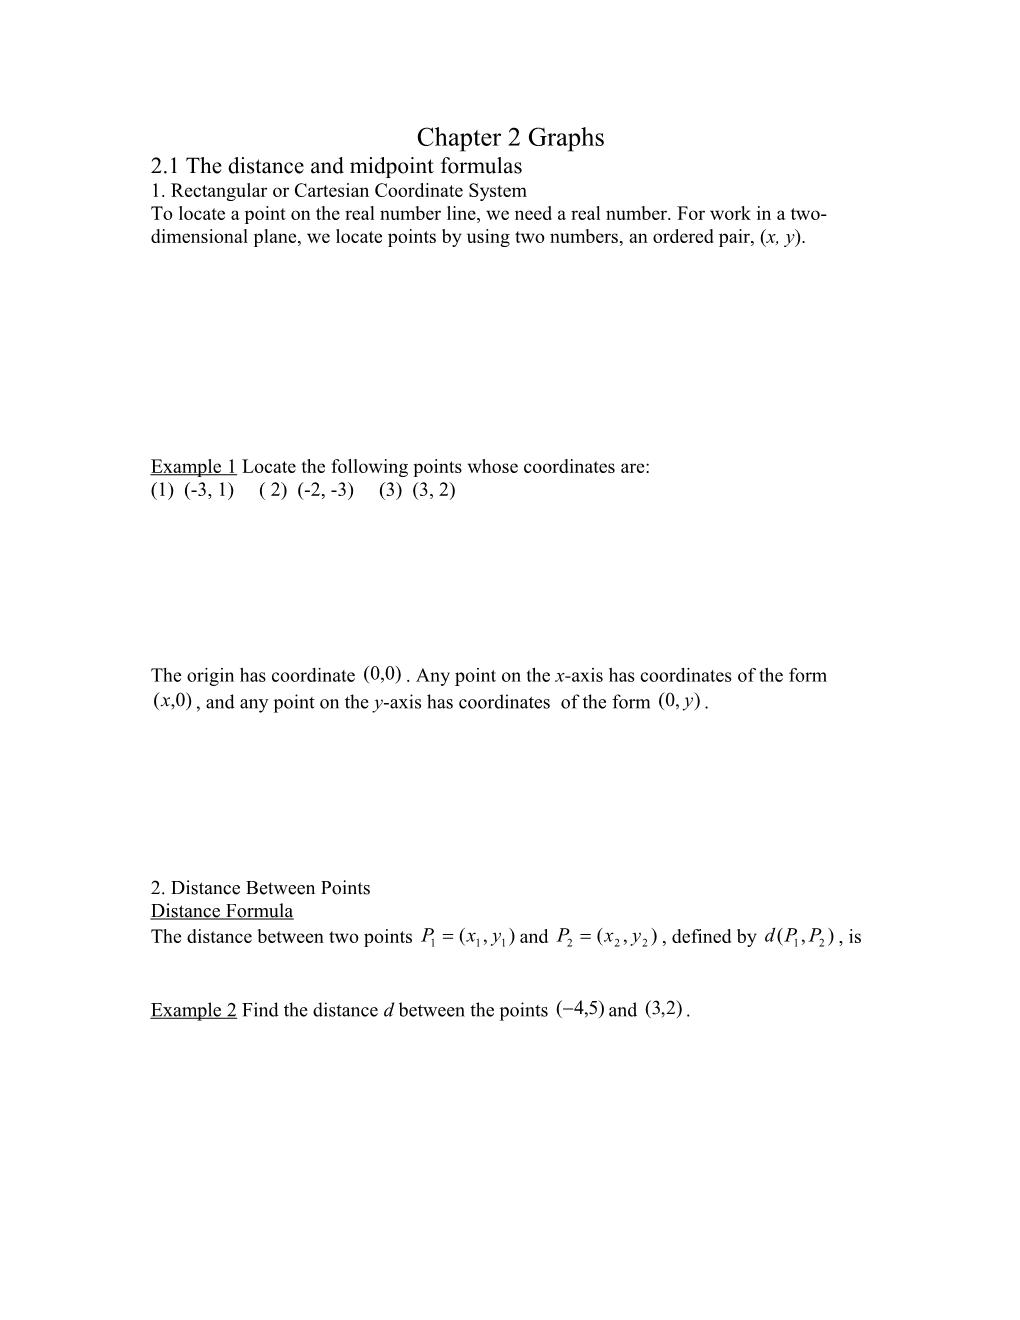 2.1 the Distance and Midpoint Formulas